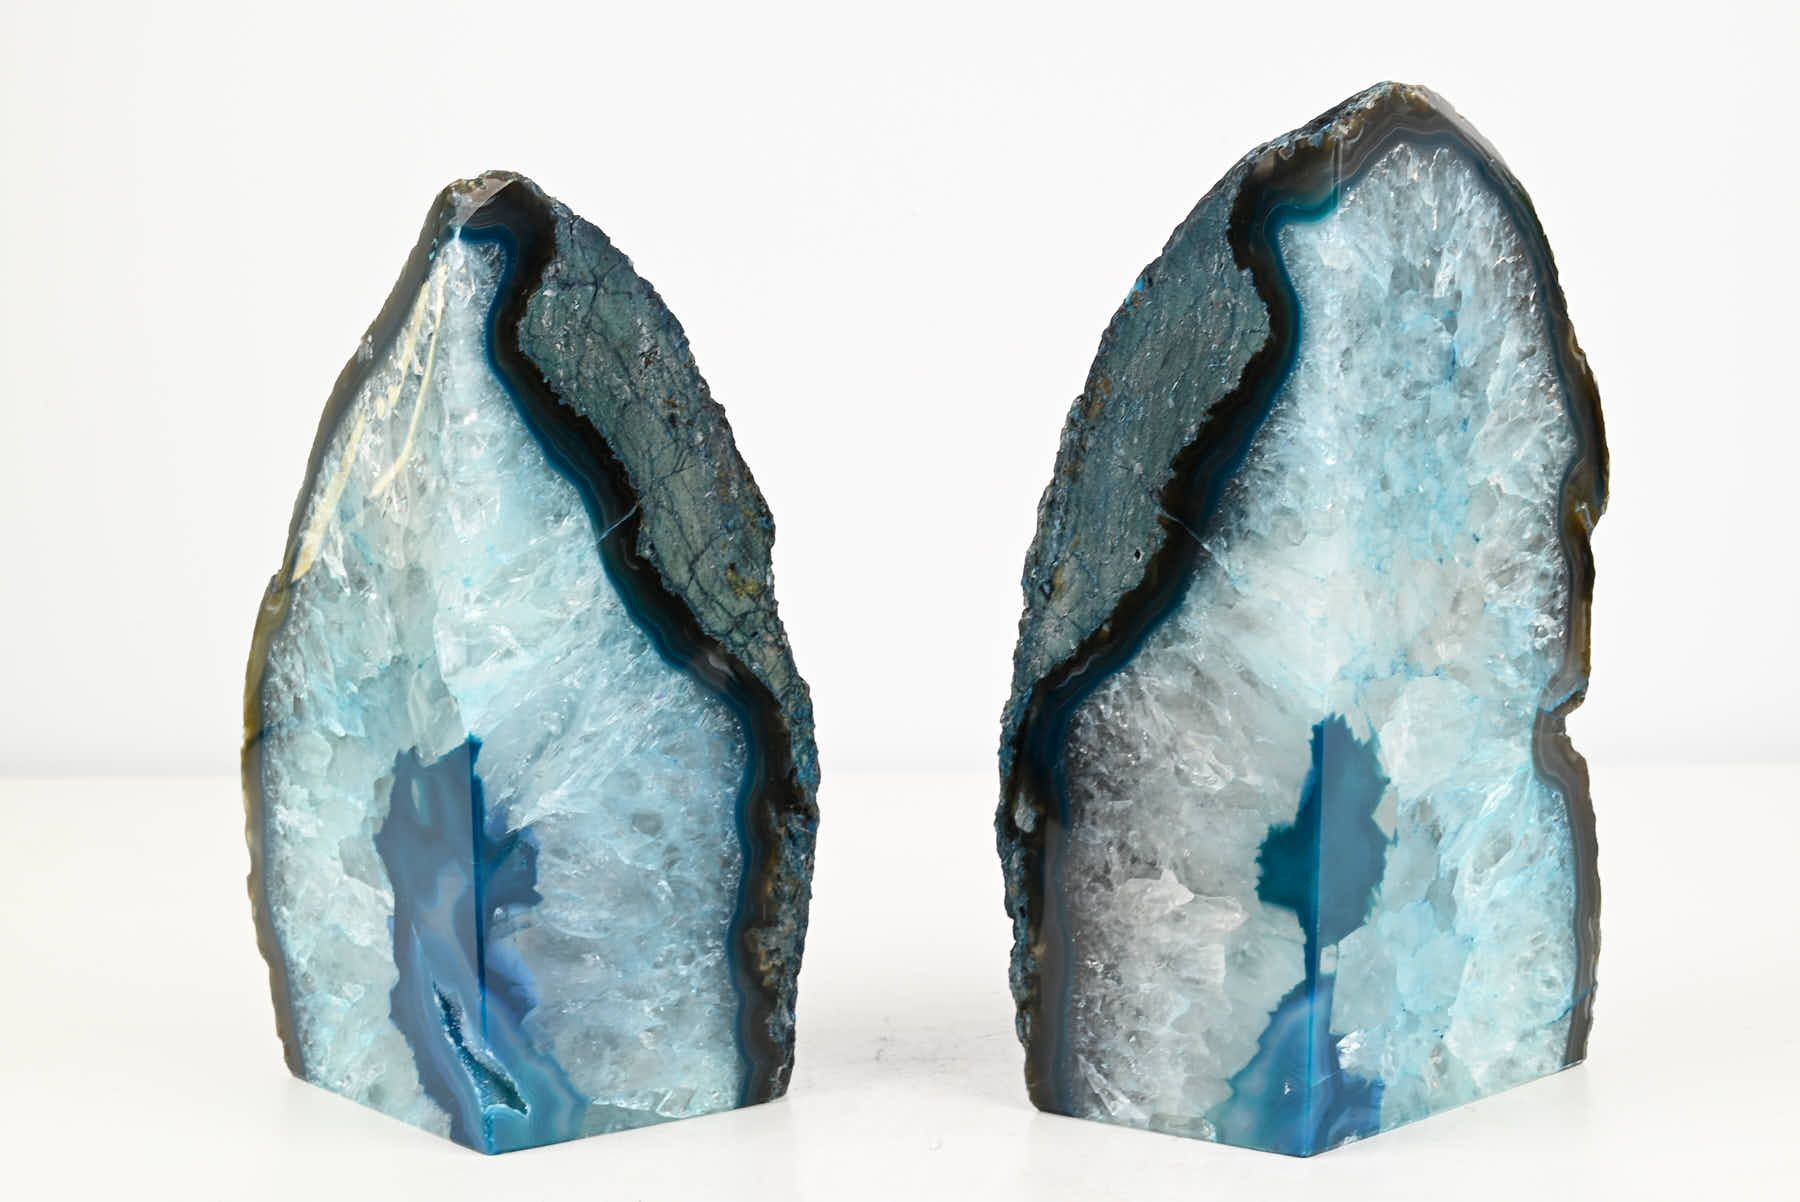 Extra Quality Teal Agate Bookends - 18cm tall - #BOTEAL-12003